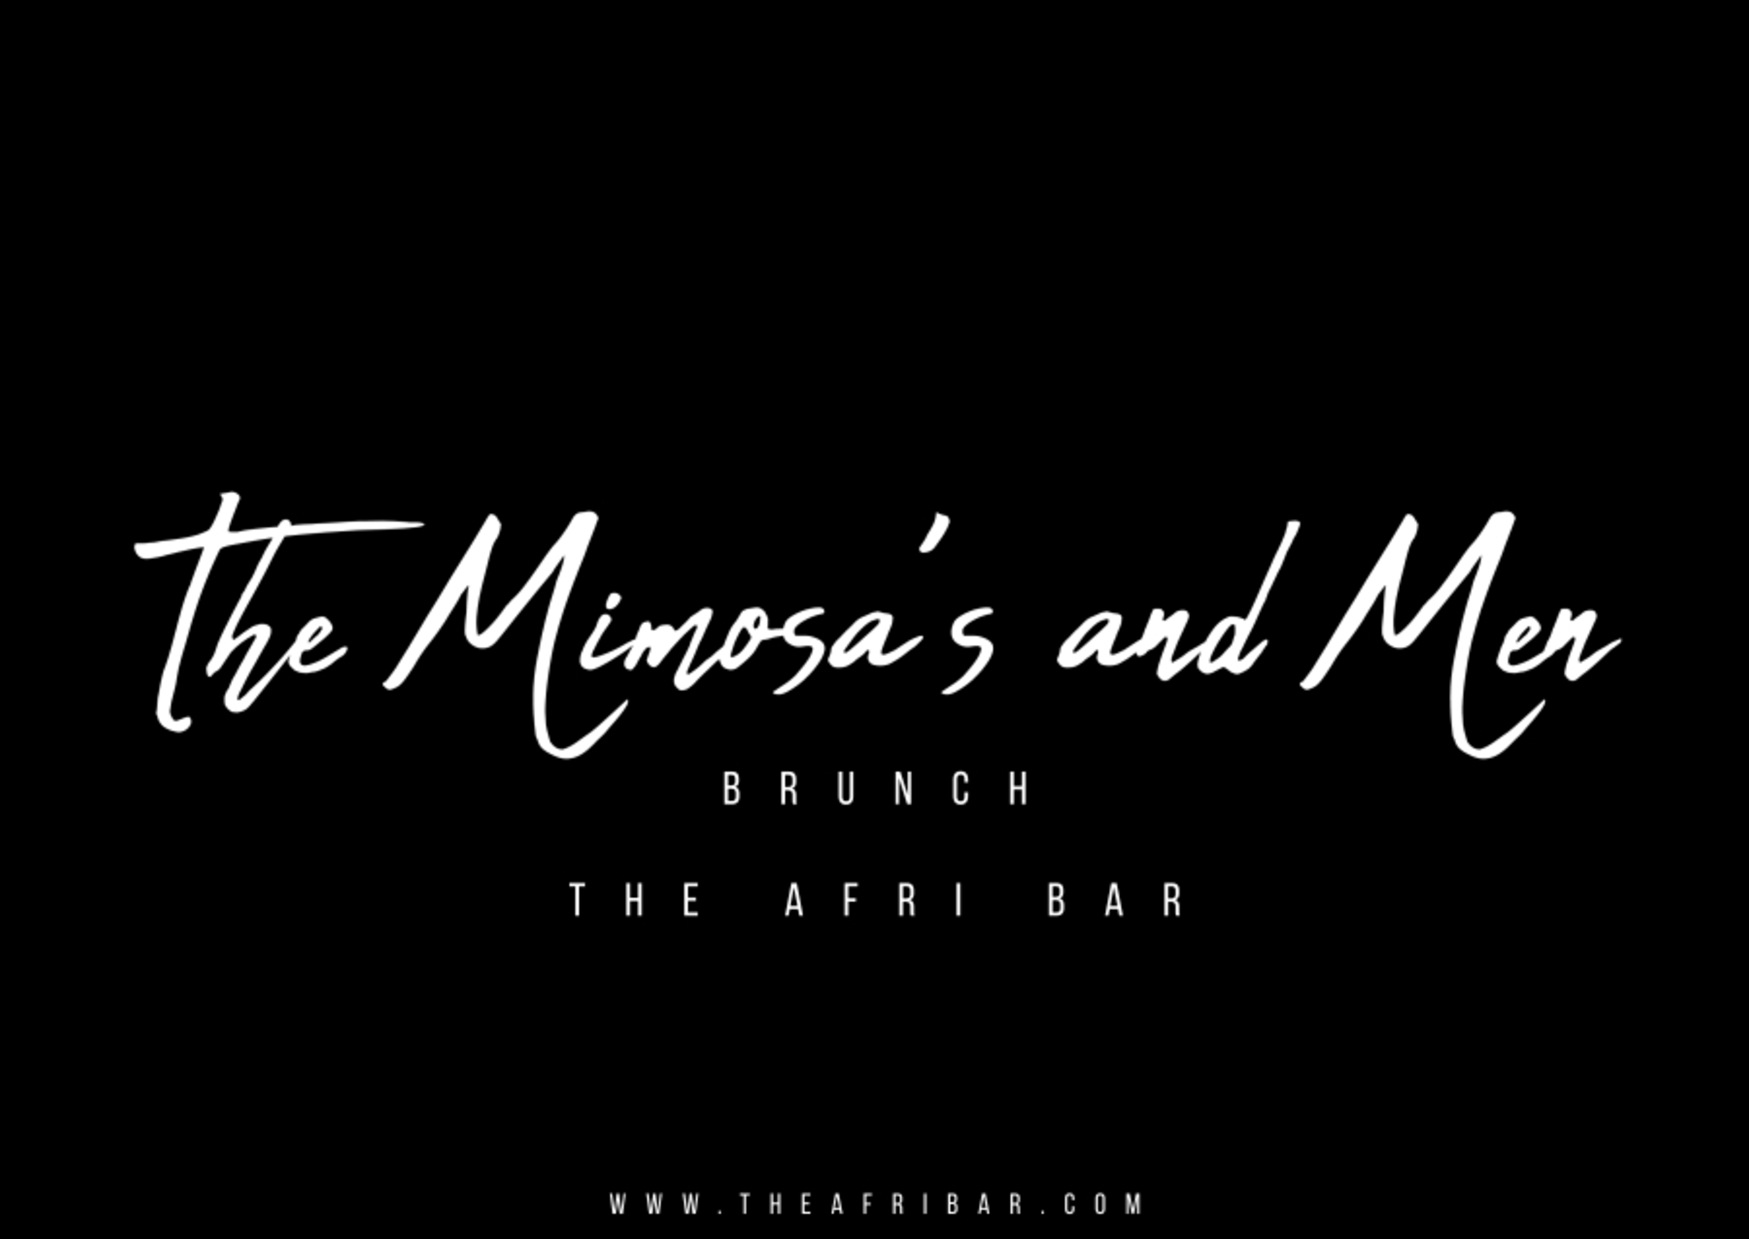 The Mimosas and Men Brunch